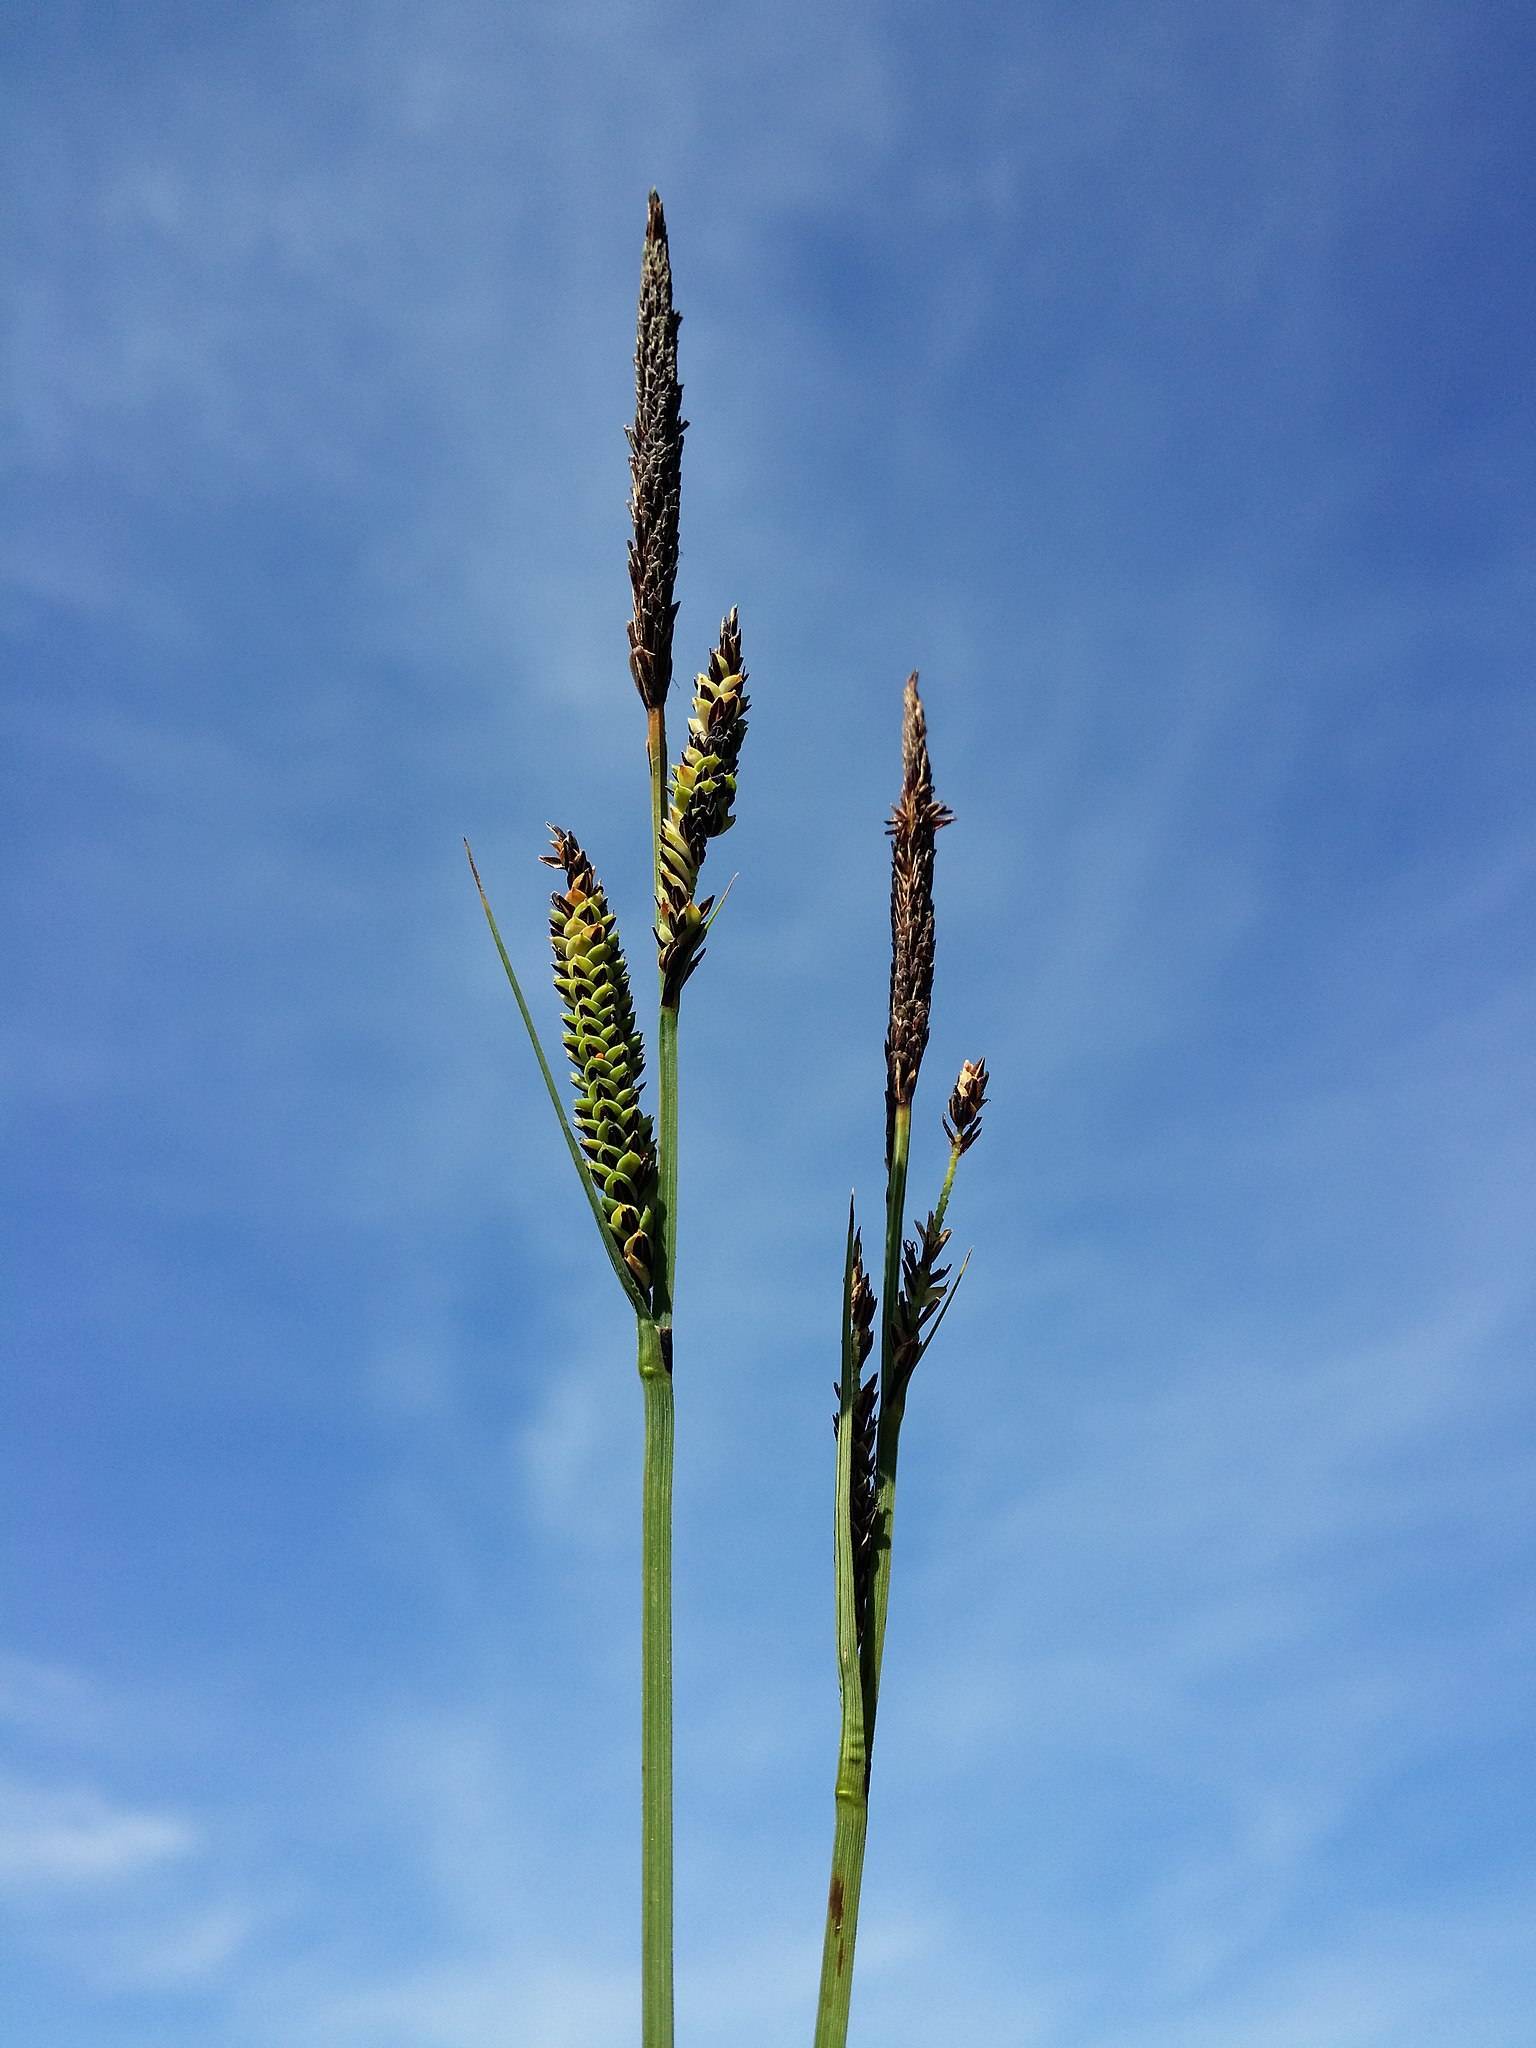 lime-brown spikelets with lime foliage